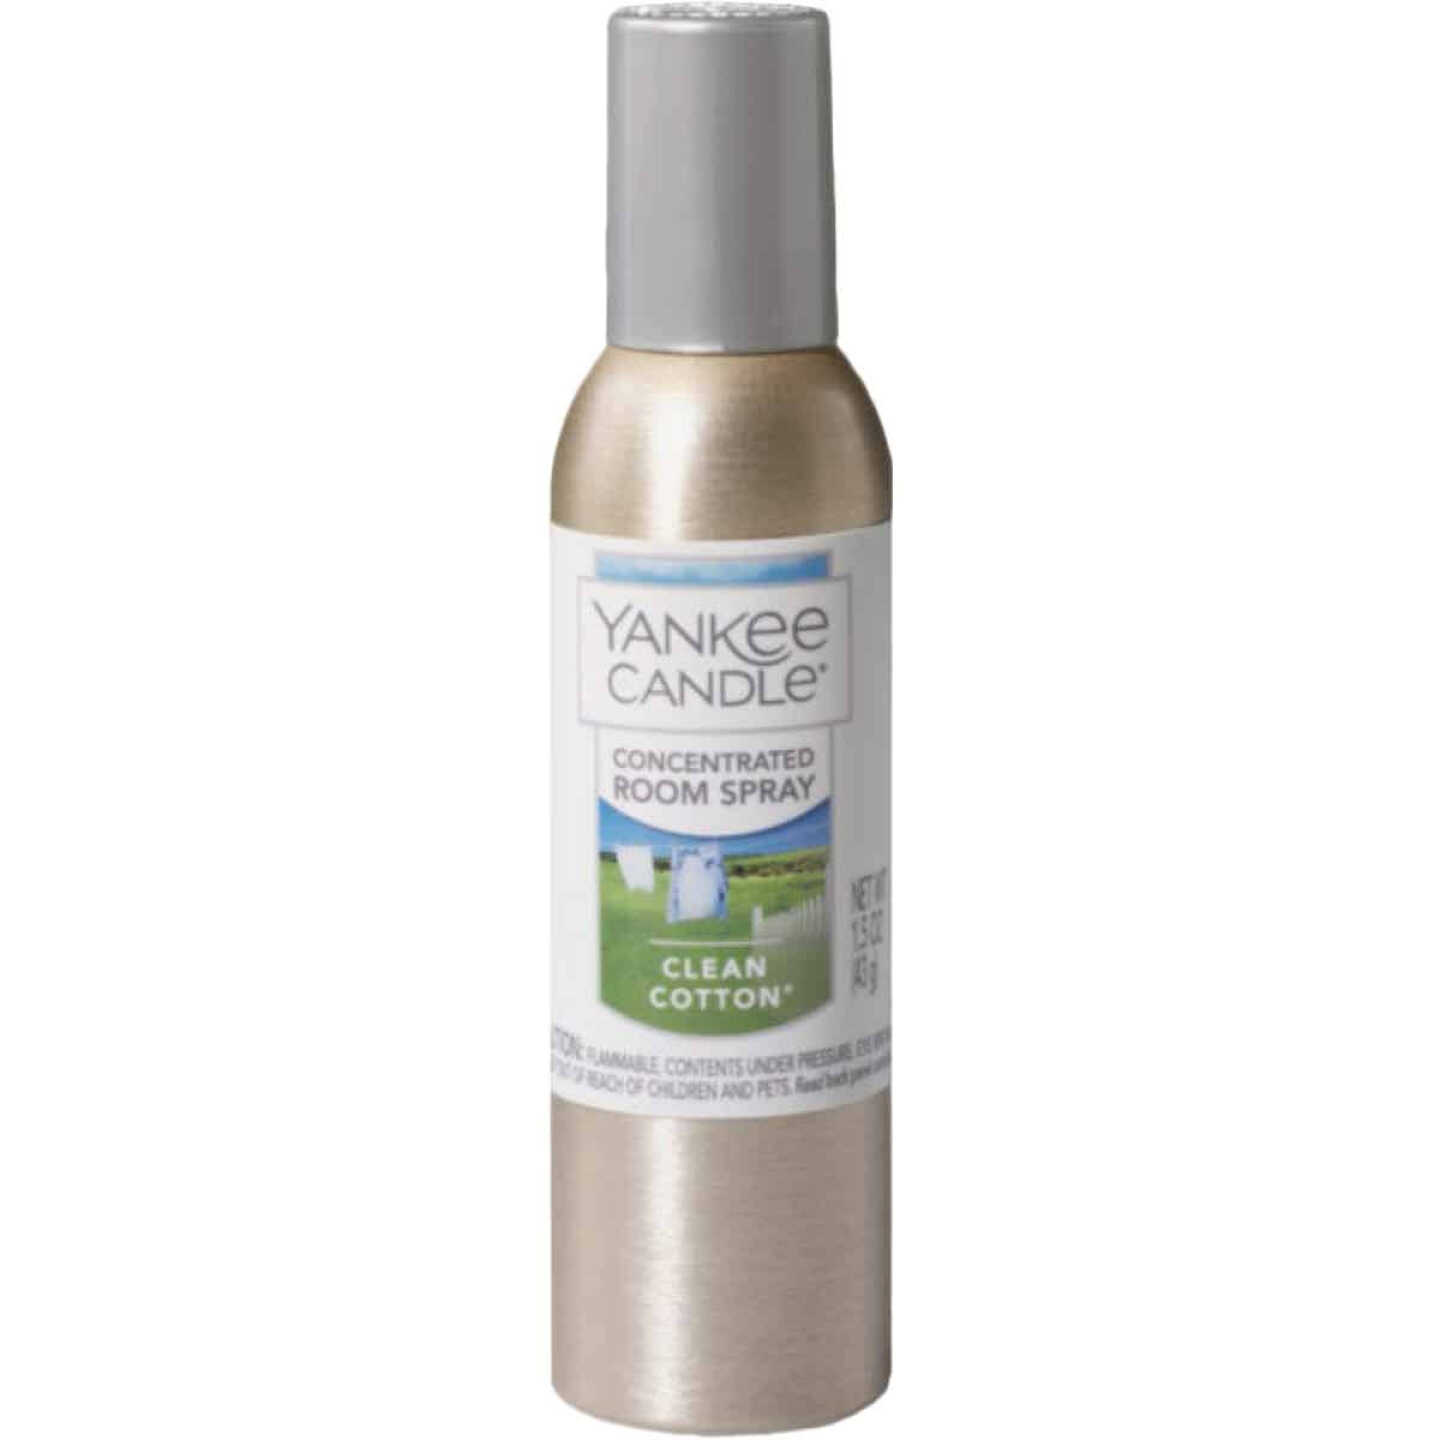 Yankee Candle 1.5 Oz. Clean Cotton Concentrated Room Spray Air Freshener -  Ambridge Home Center